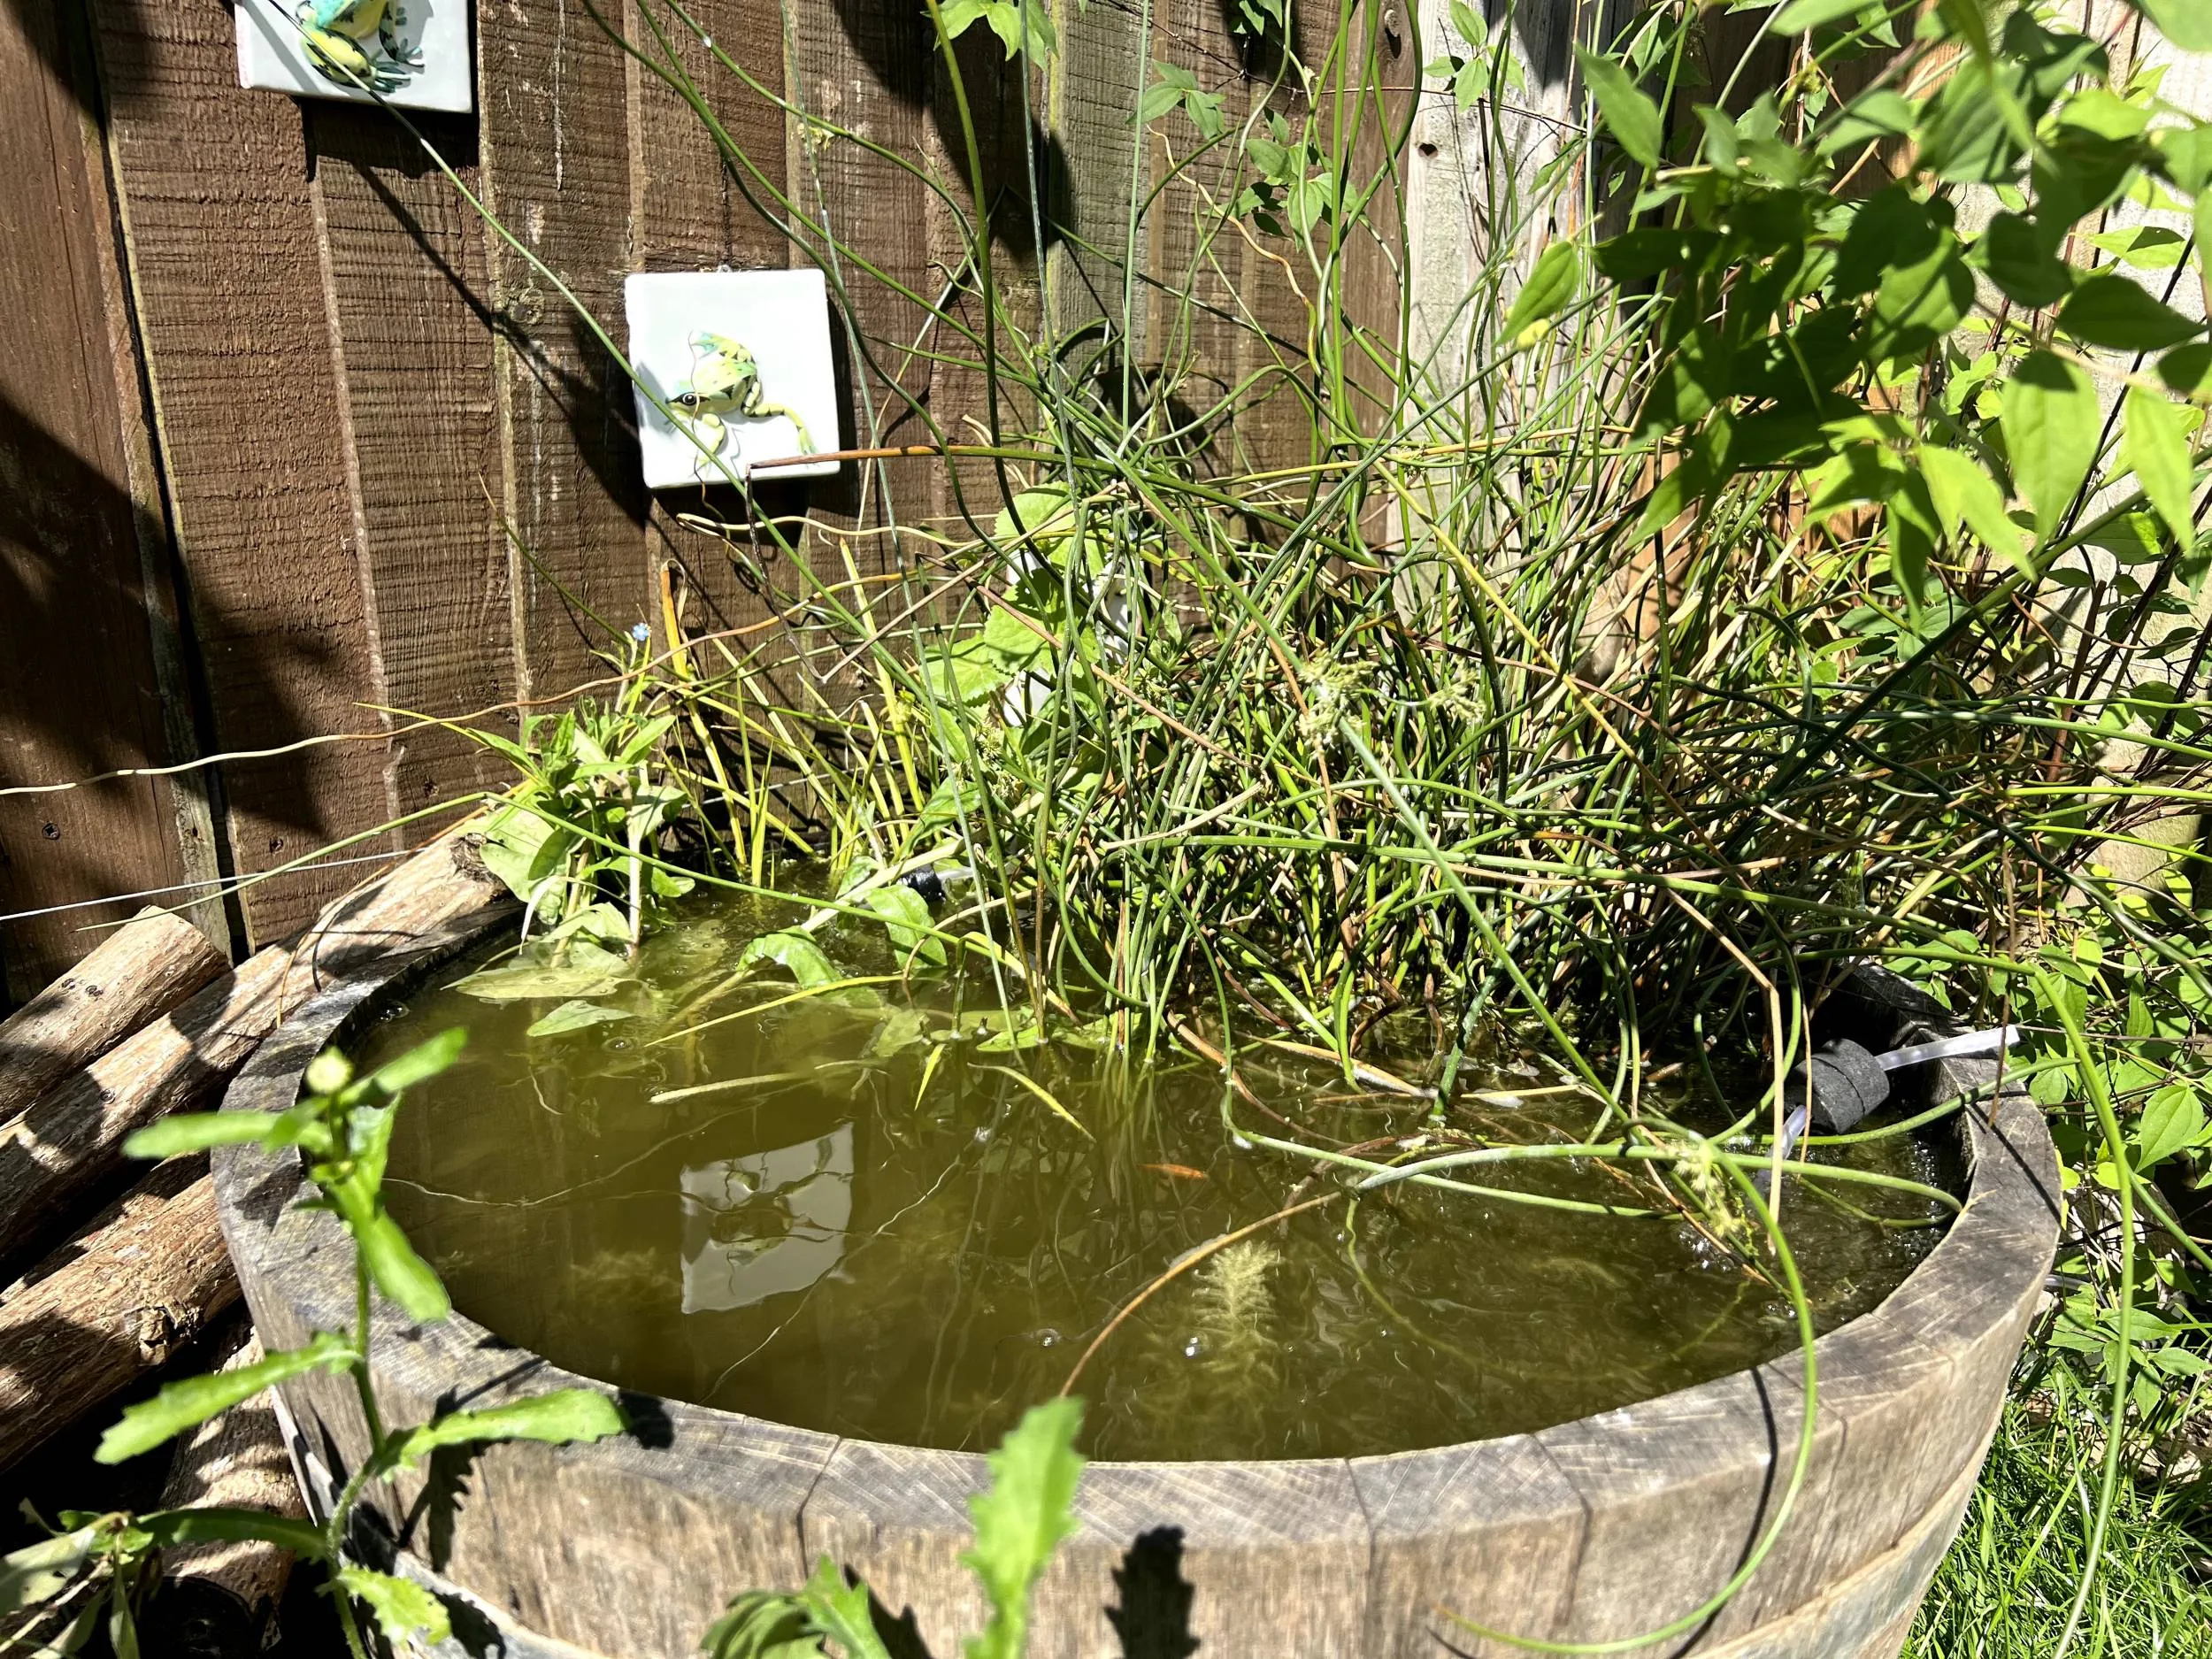 A small wildlife pond, contained in a wooden barrel.